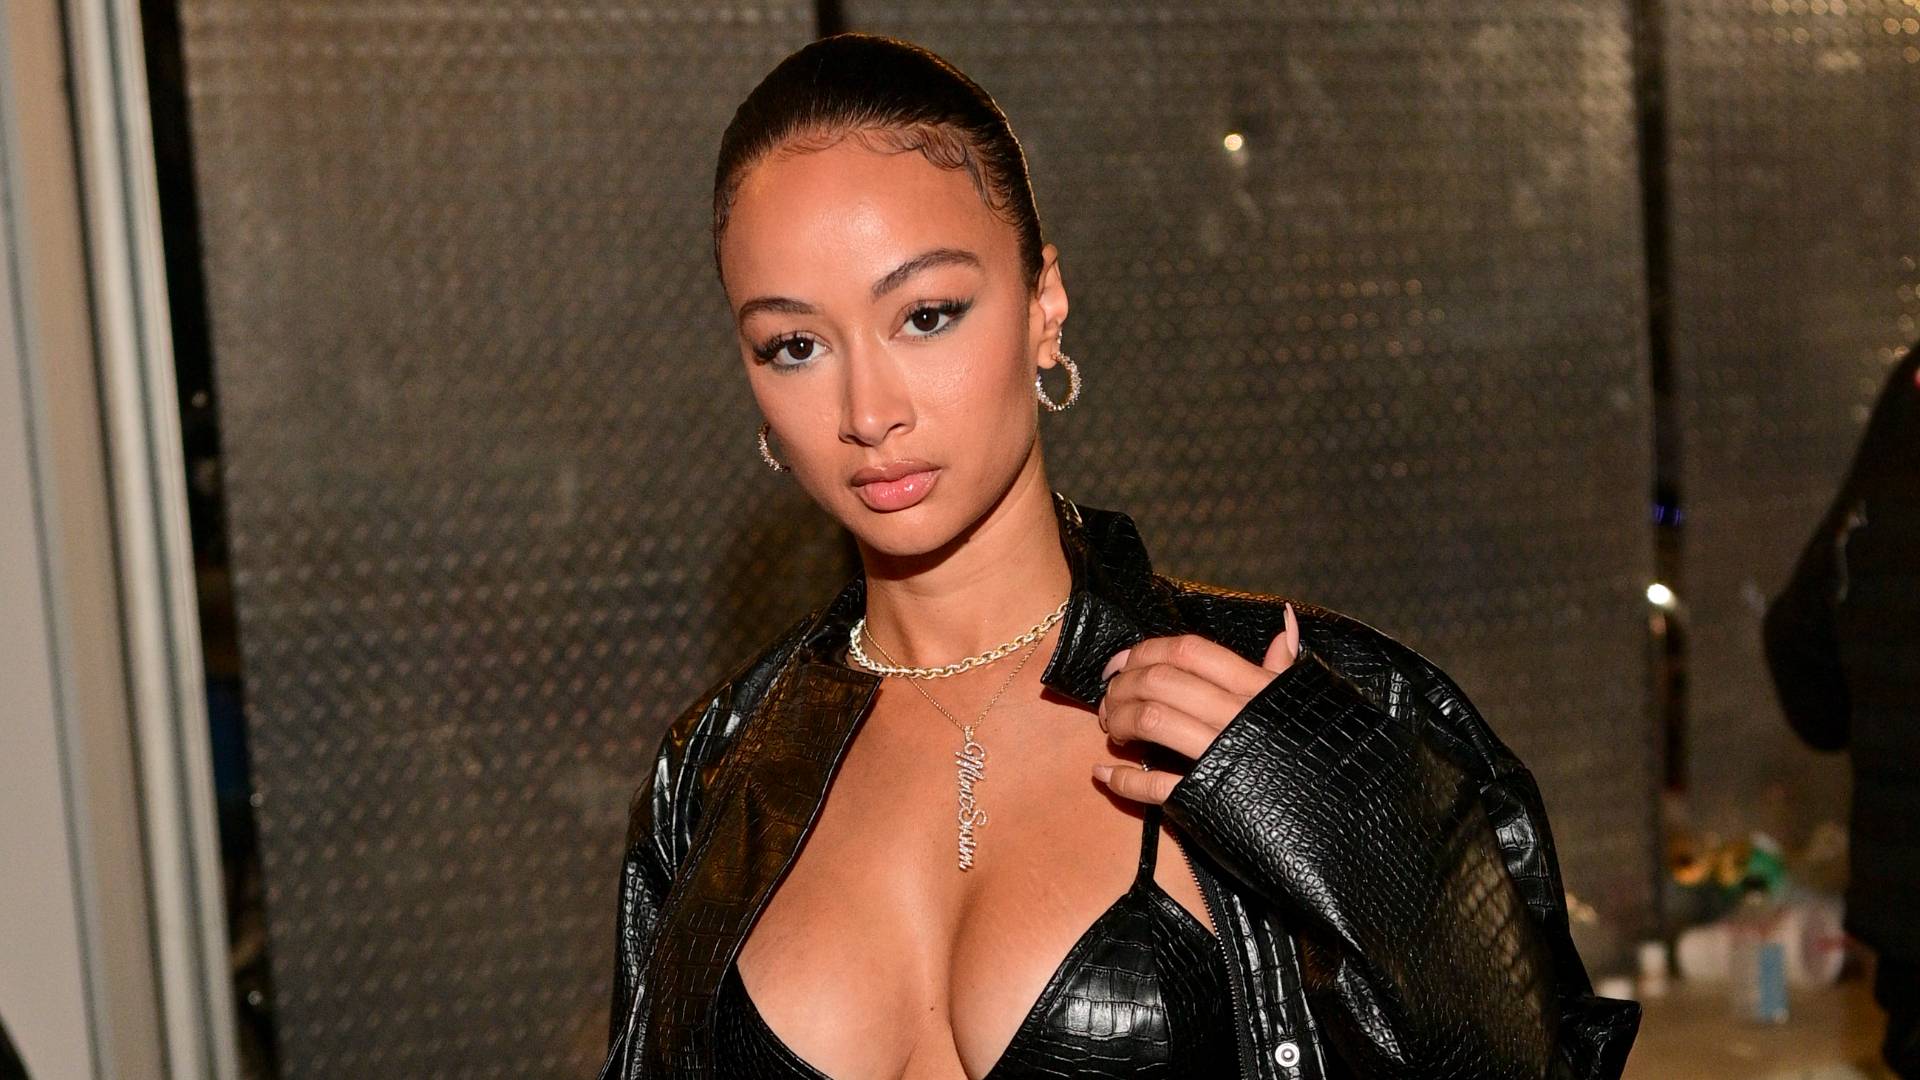 Draya Michele attends a Day Party Hosted by Travis Scott at Allure Gentlemen's Club on March 6, 2021 in Atlanta, Georgia. 